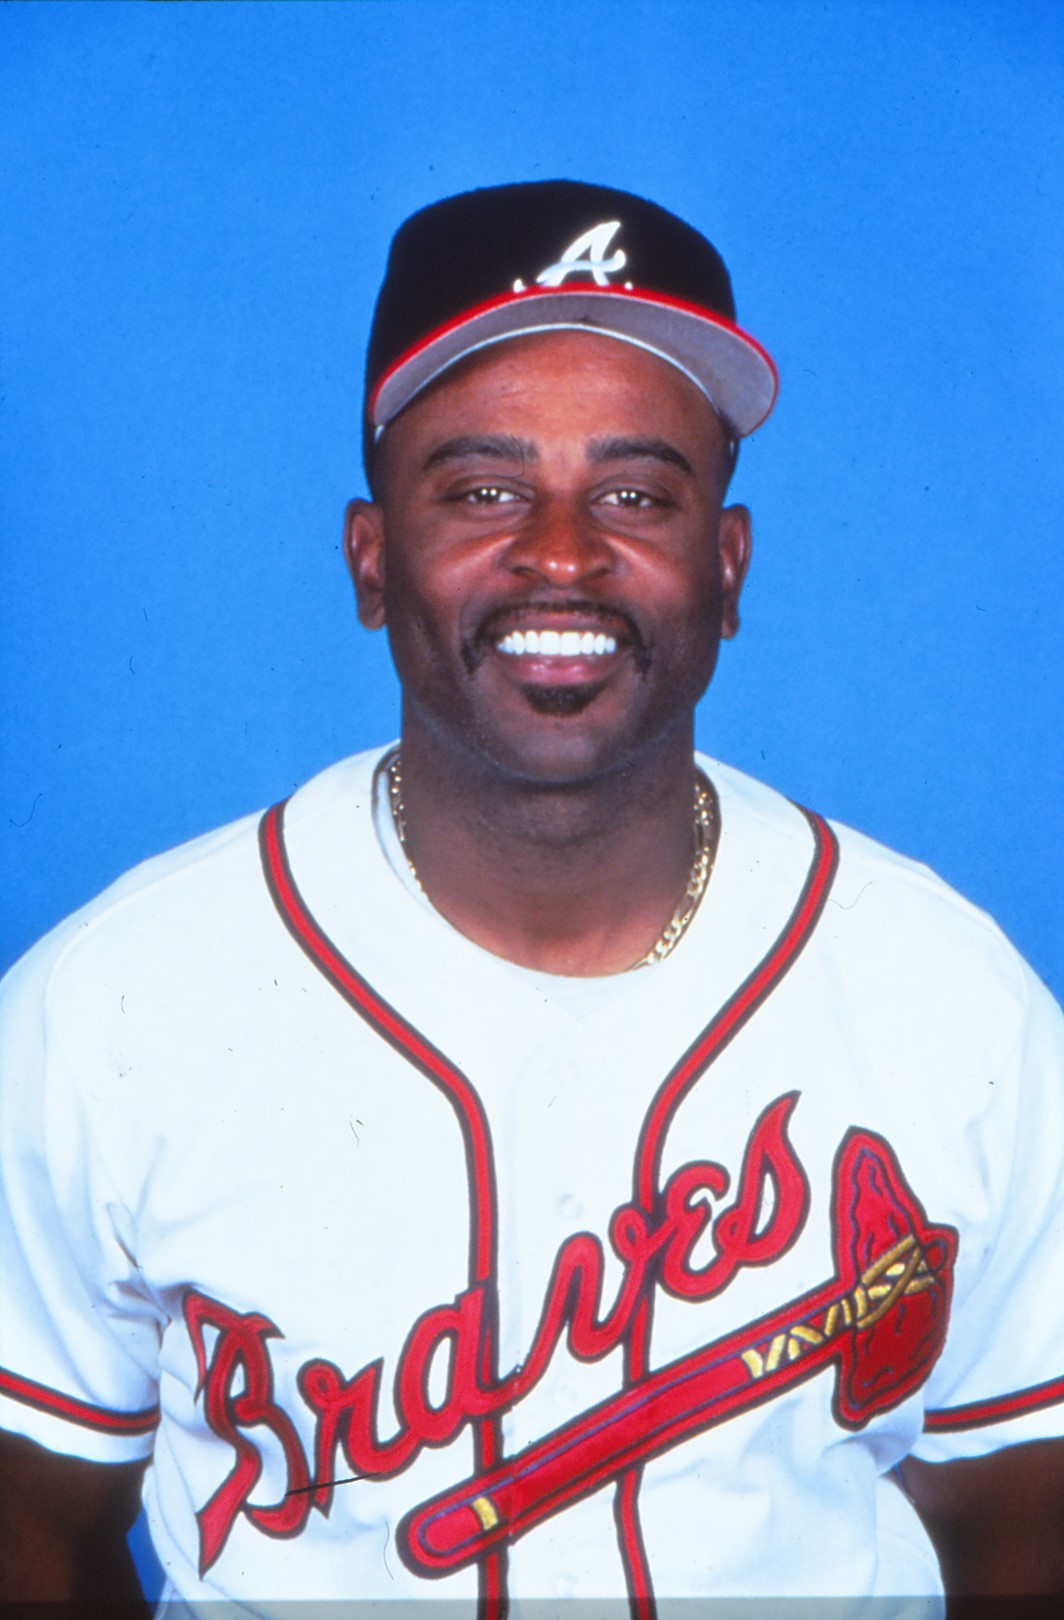 Marquis Grissom, former Braves player from 1995 team that won World Series  shares baseball success